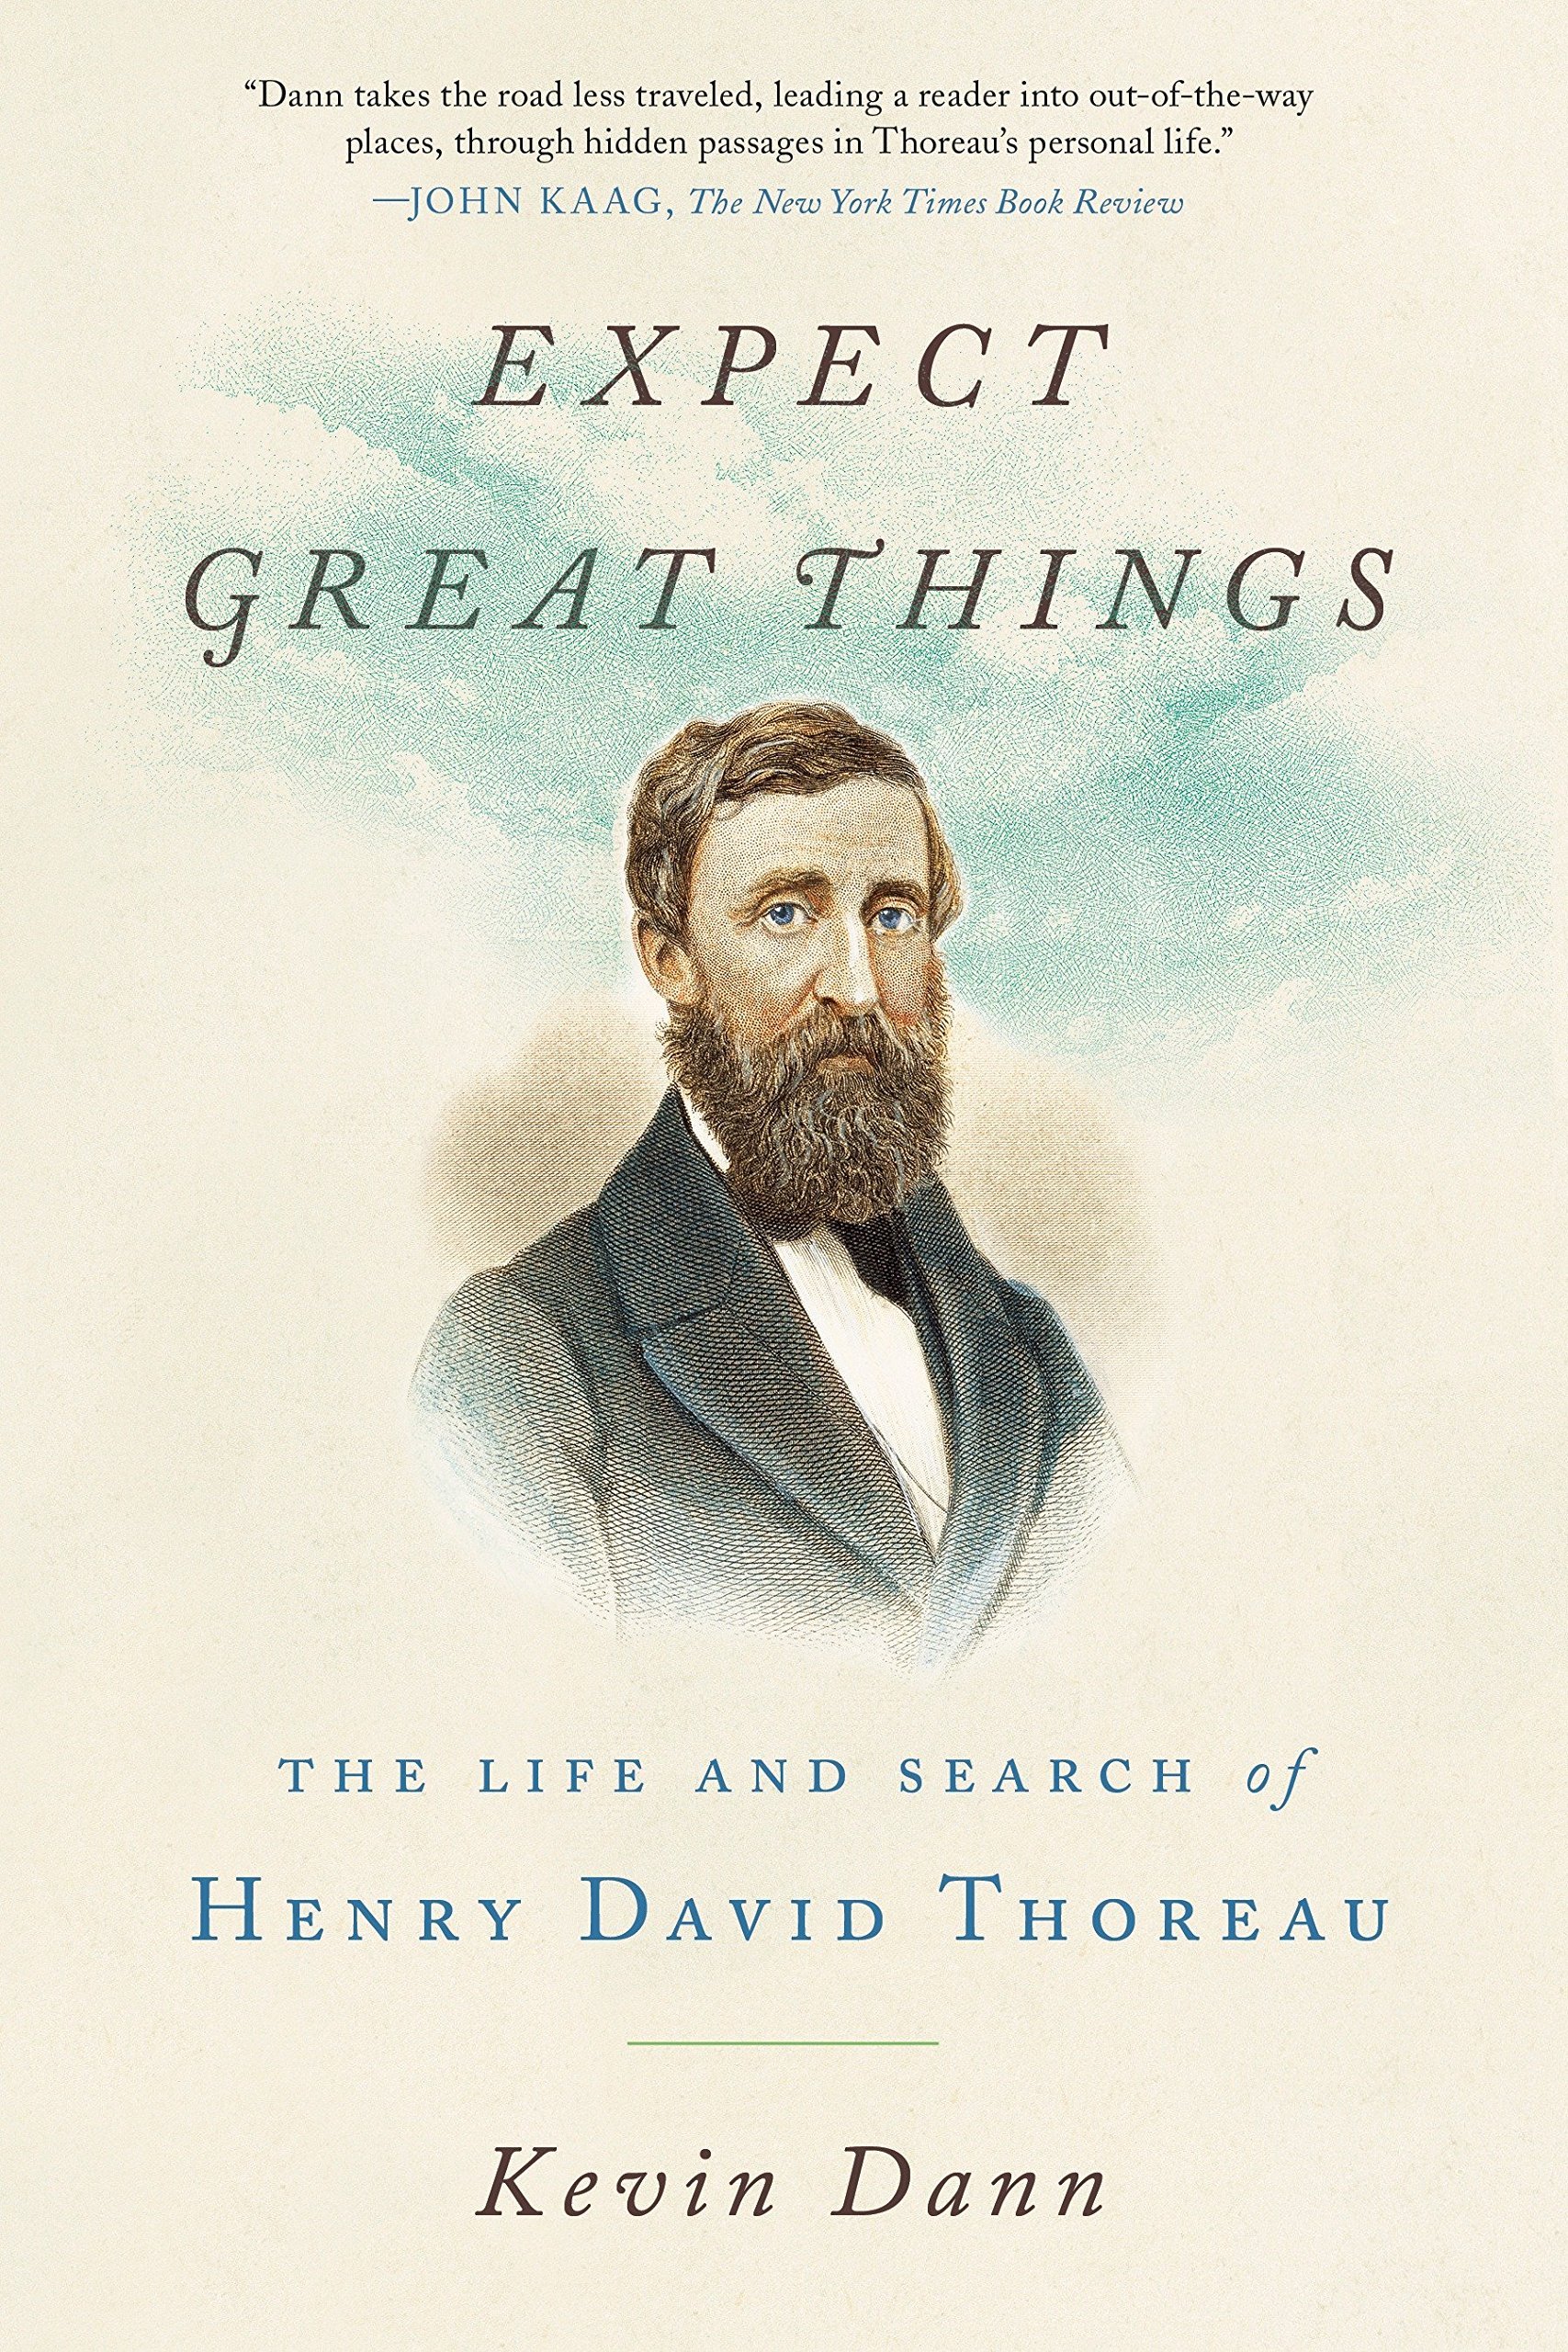 This thrilling, meticulous biography captures the full arc of Henry Thoreau's life as a mystic, spiritual seeker, and explorer in transcendental realms.